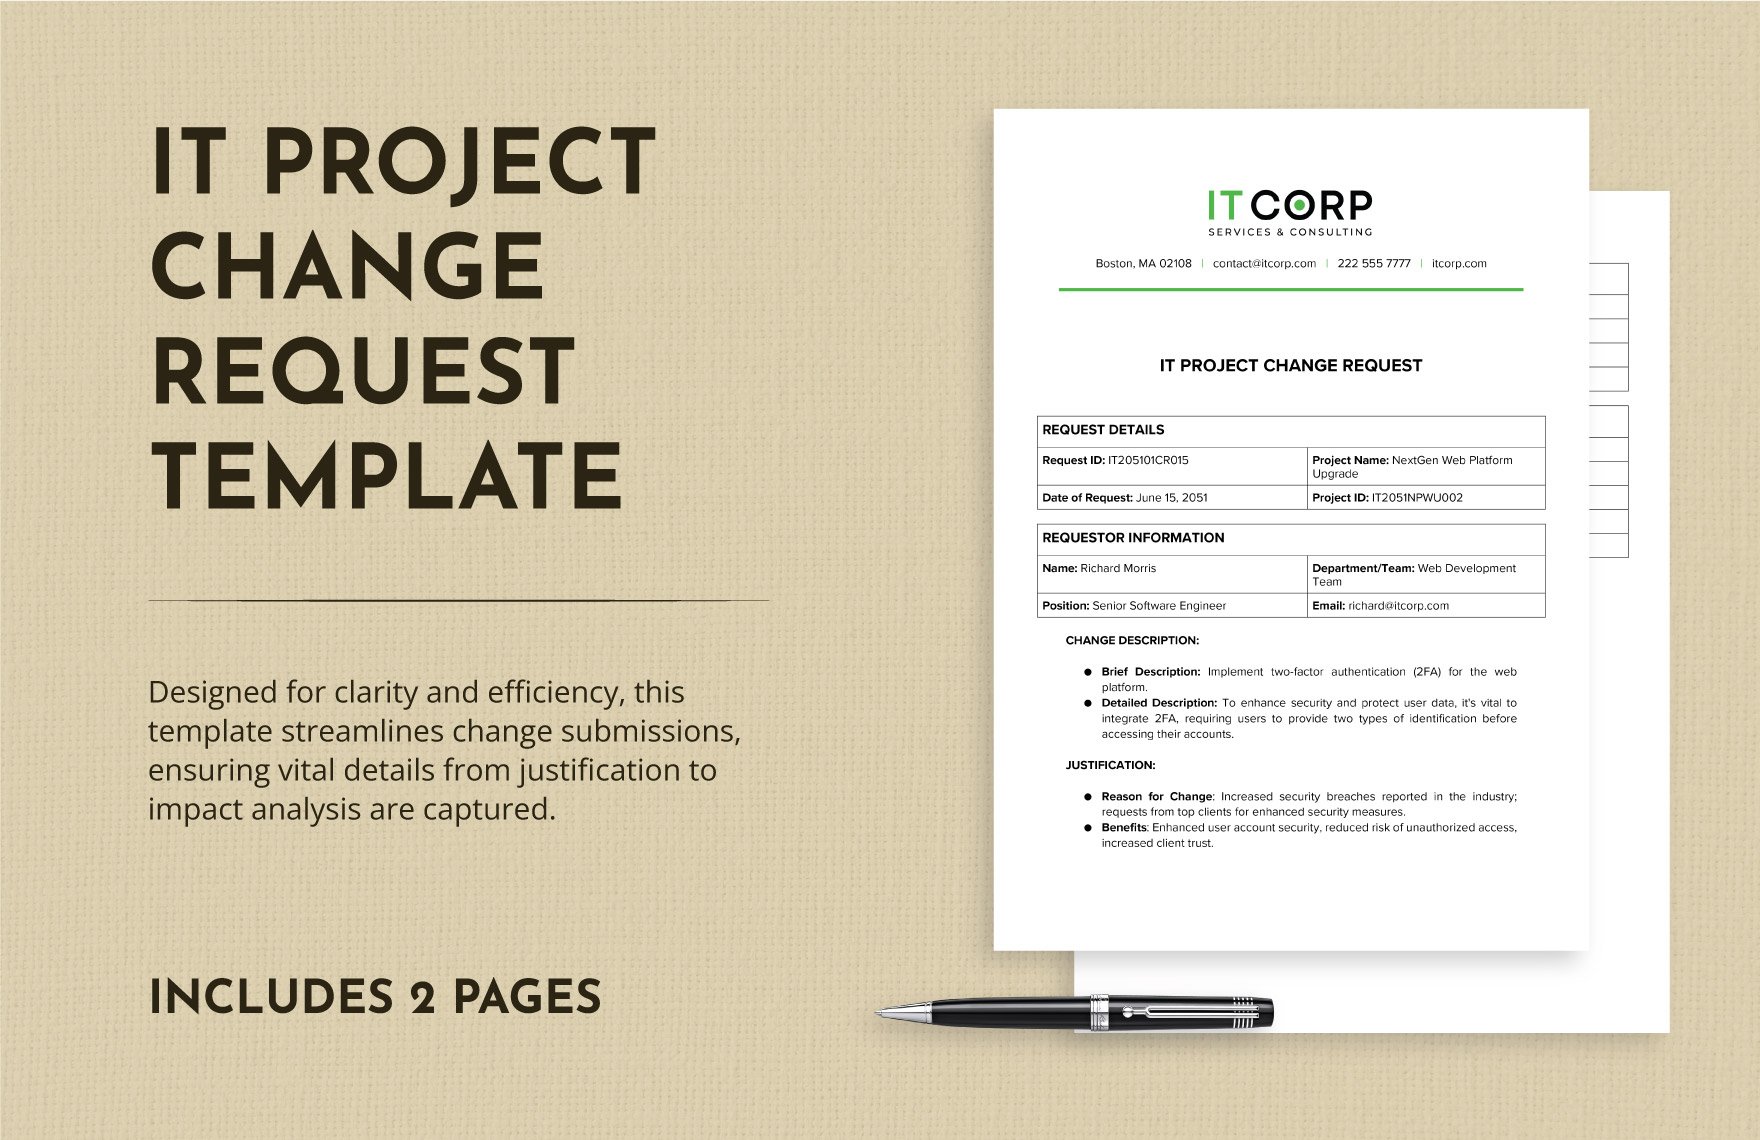 IT Project Change Request Template